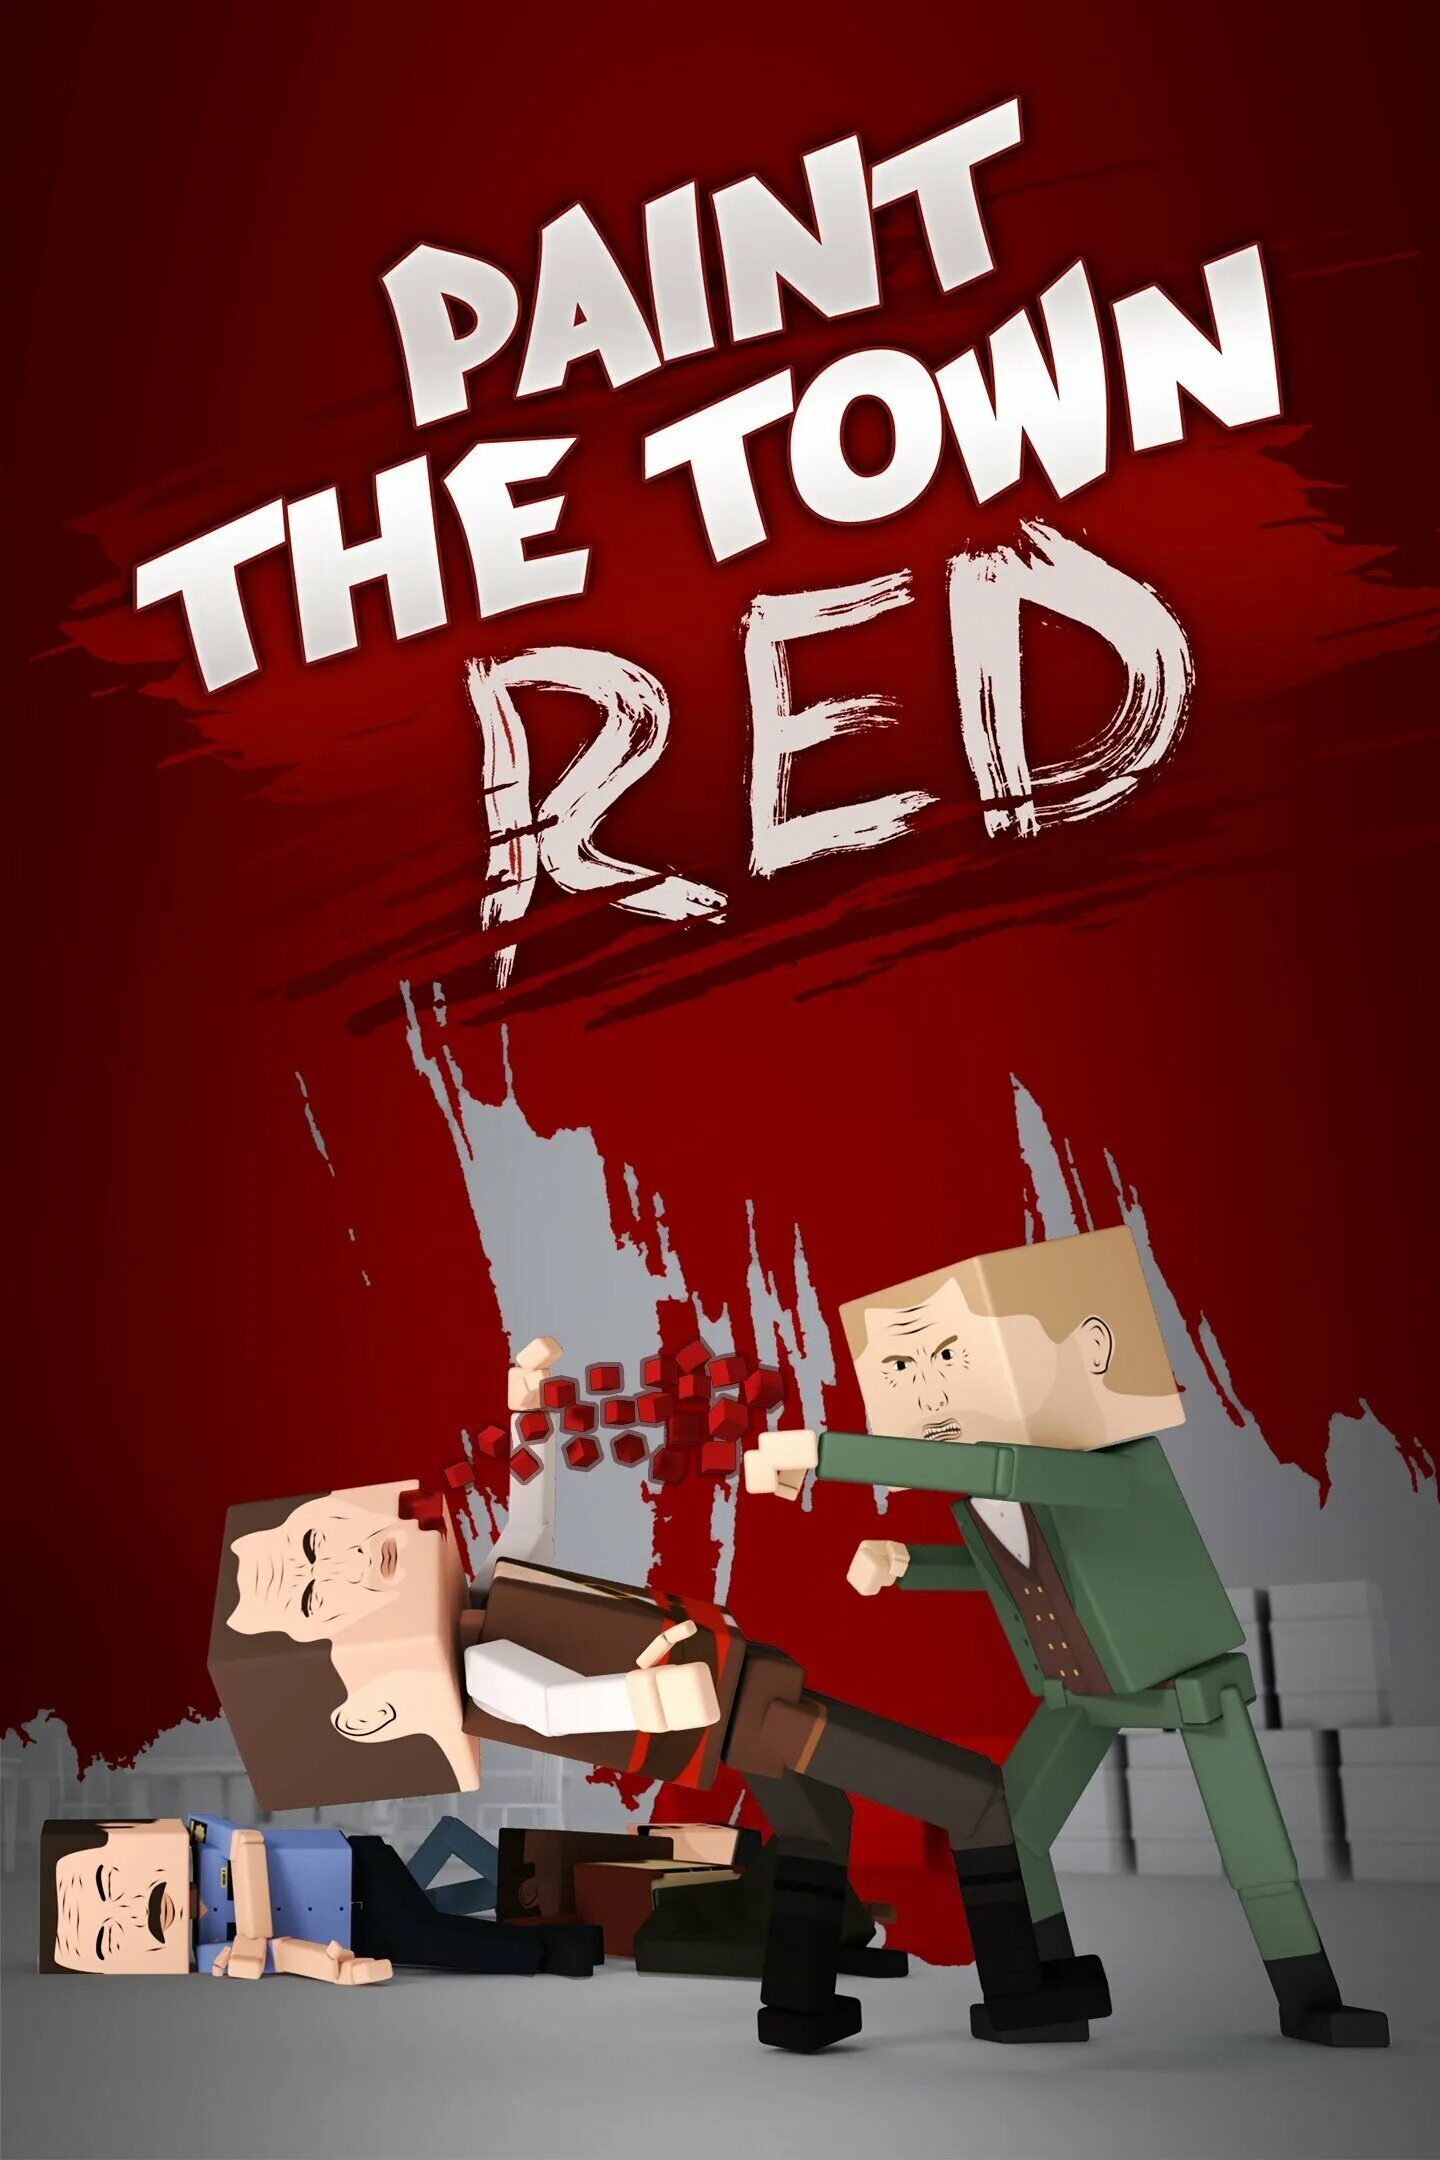 Игры painting town red. Игра Paint the Town Red. Карточки Paint the Town Red. Paint the Town Red армия. Paint the Town Red Xbox.